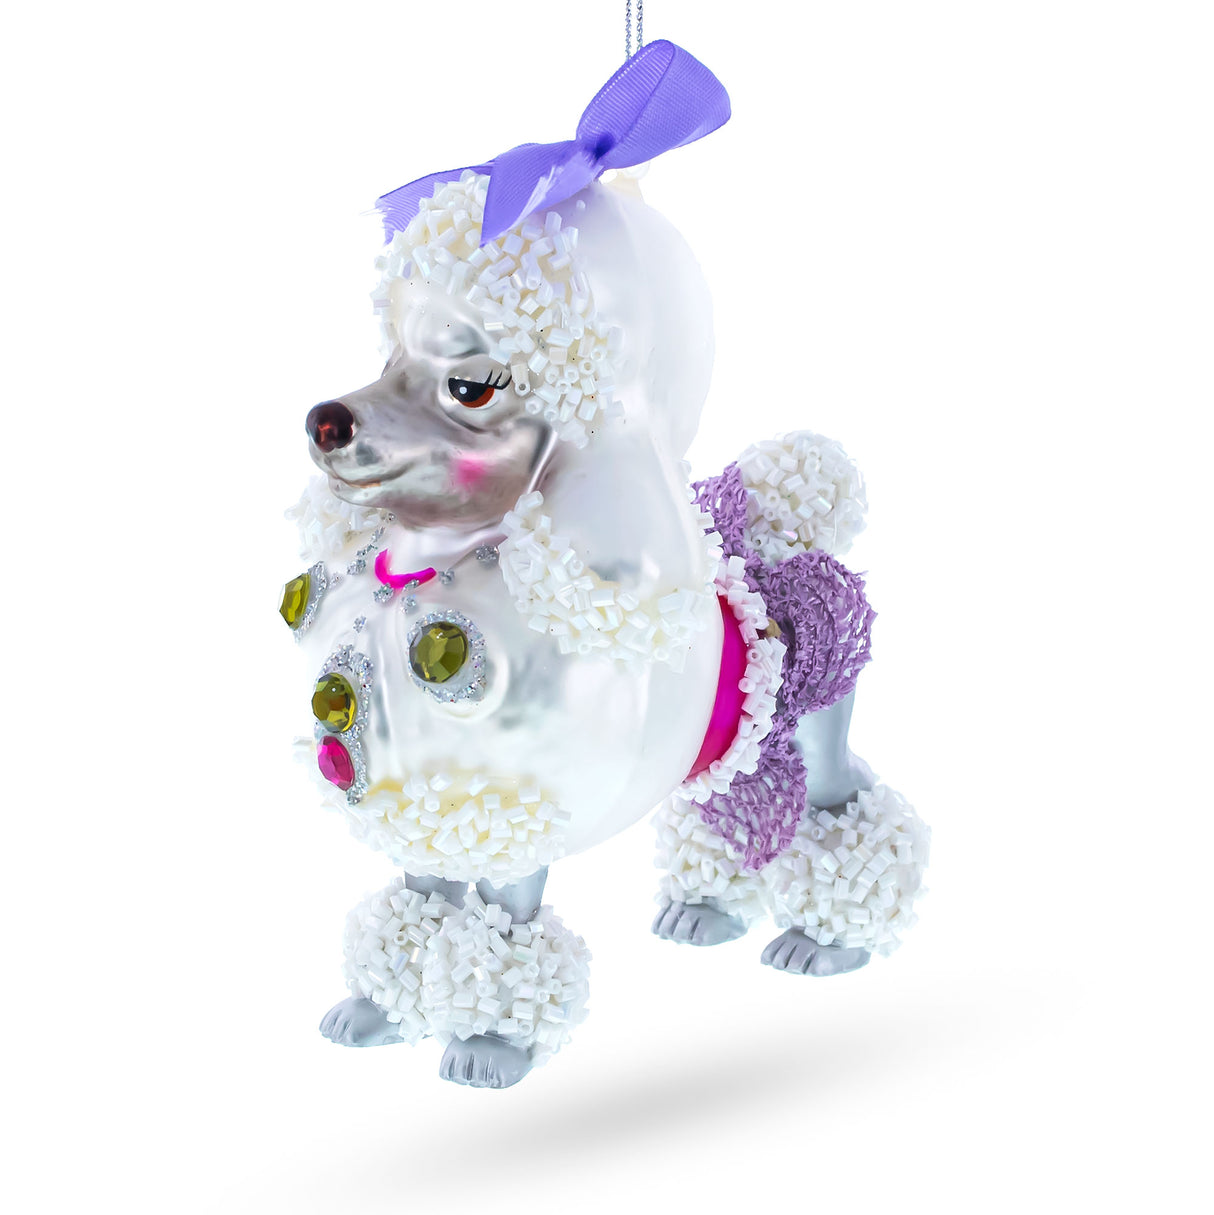 Glass Elegant Bejeweled Poodle - Blown Glass Christmas Ornament in White color